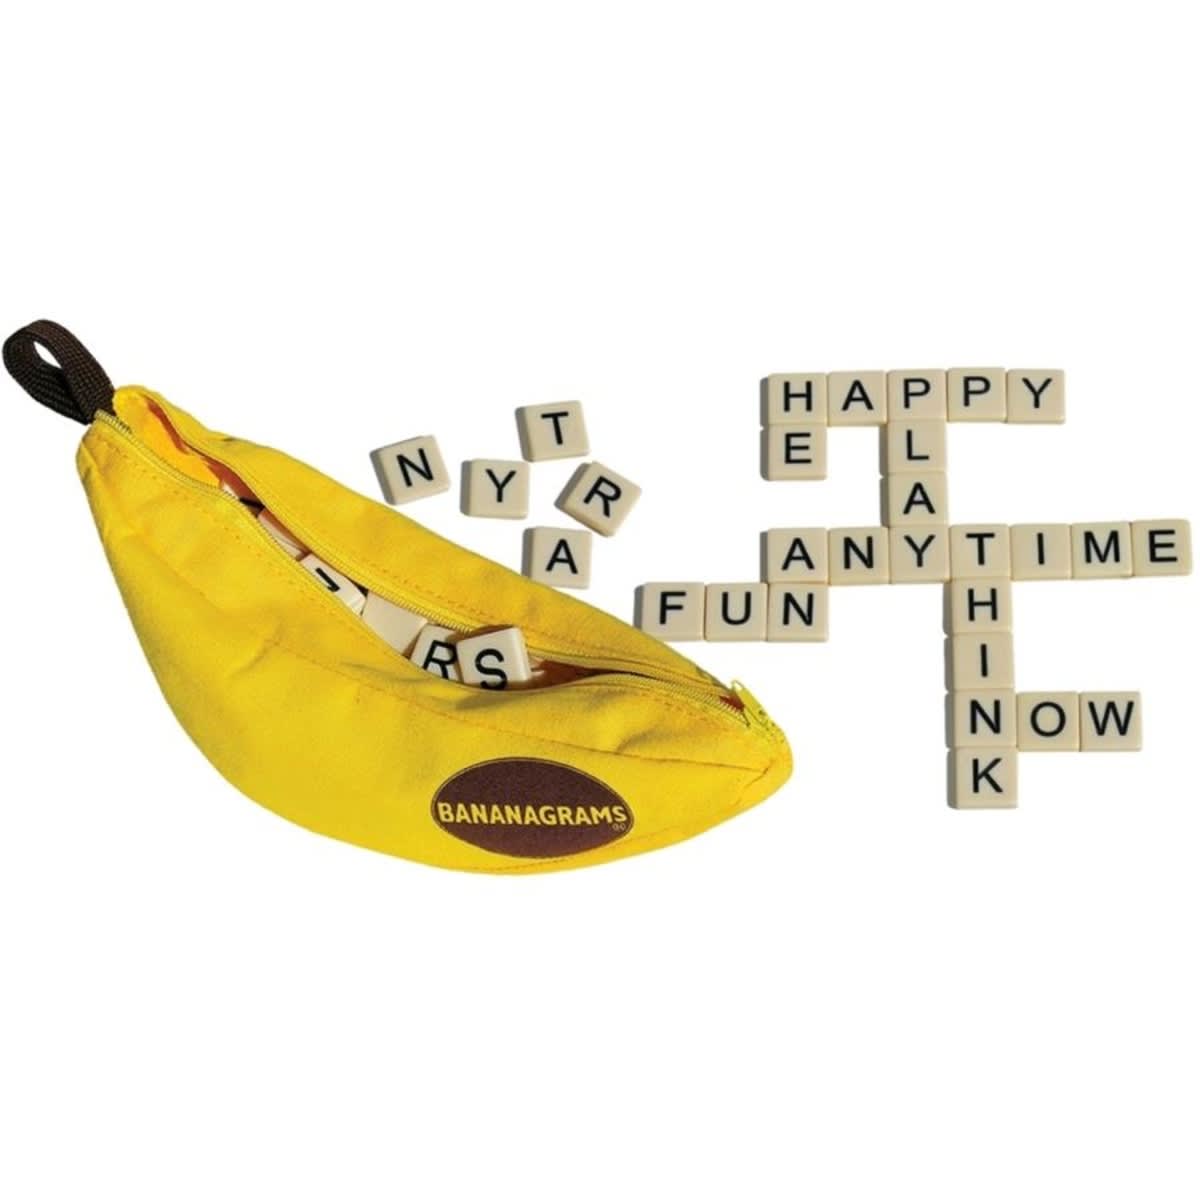 Banagrams Game example of play and open banana shaped container